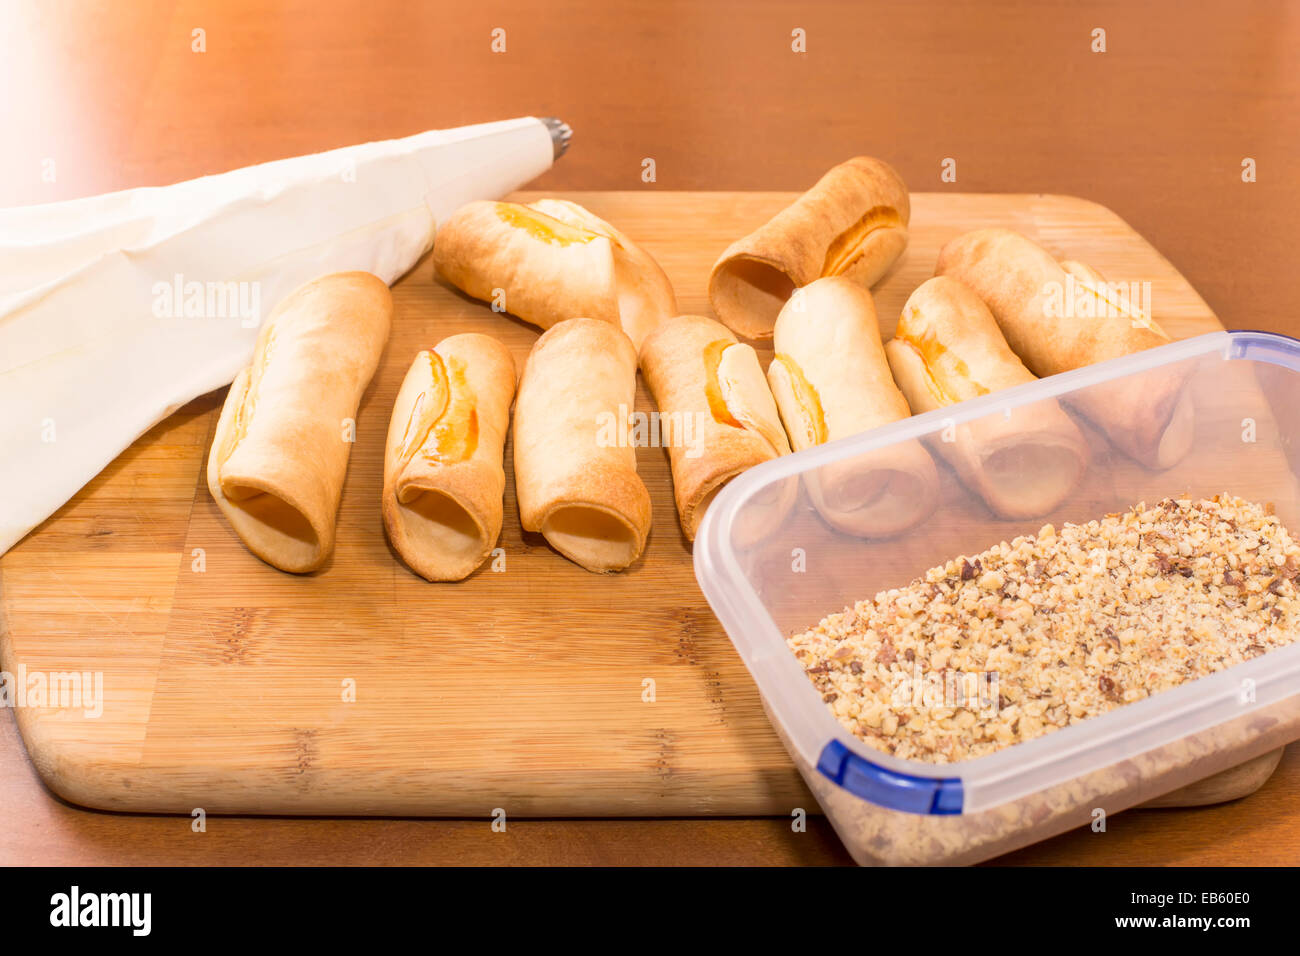 baking confection - for the cannoli tubes Stock Photo